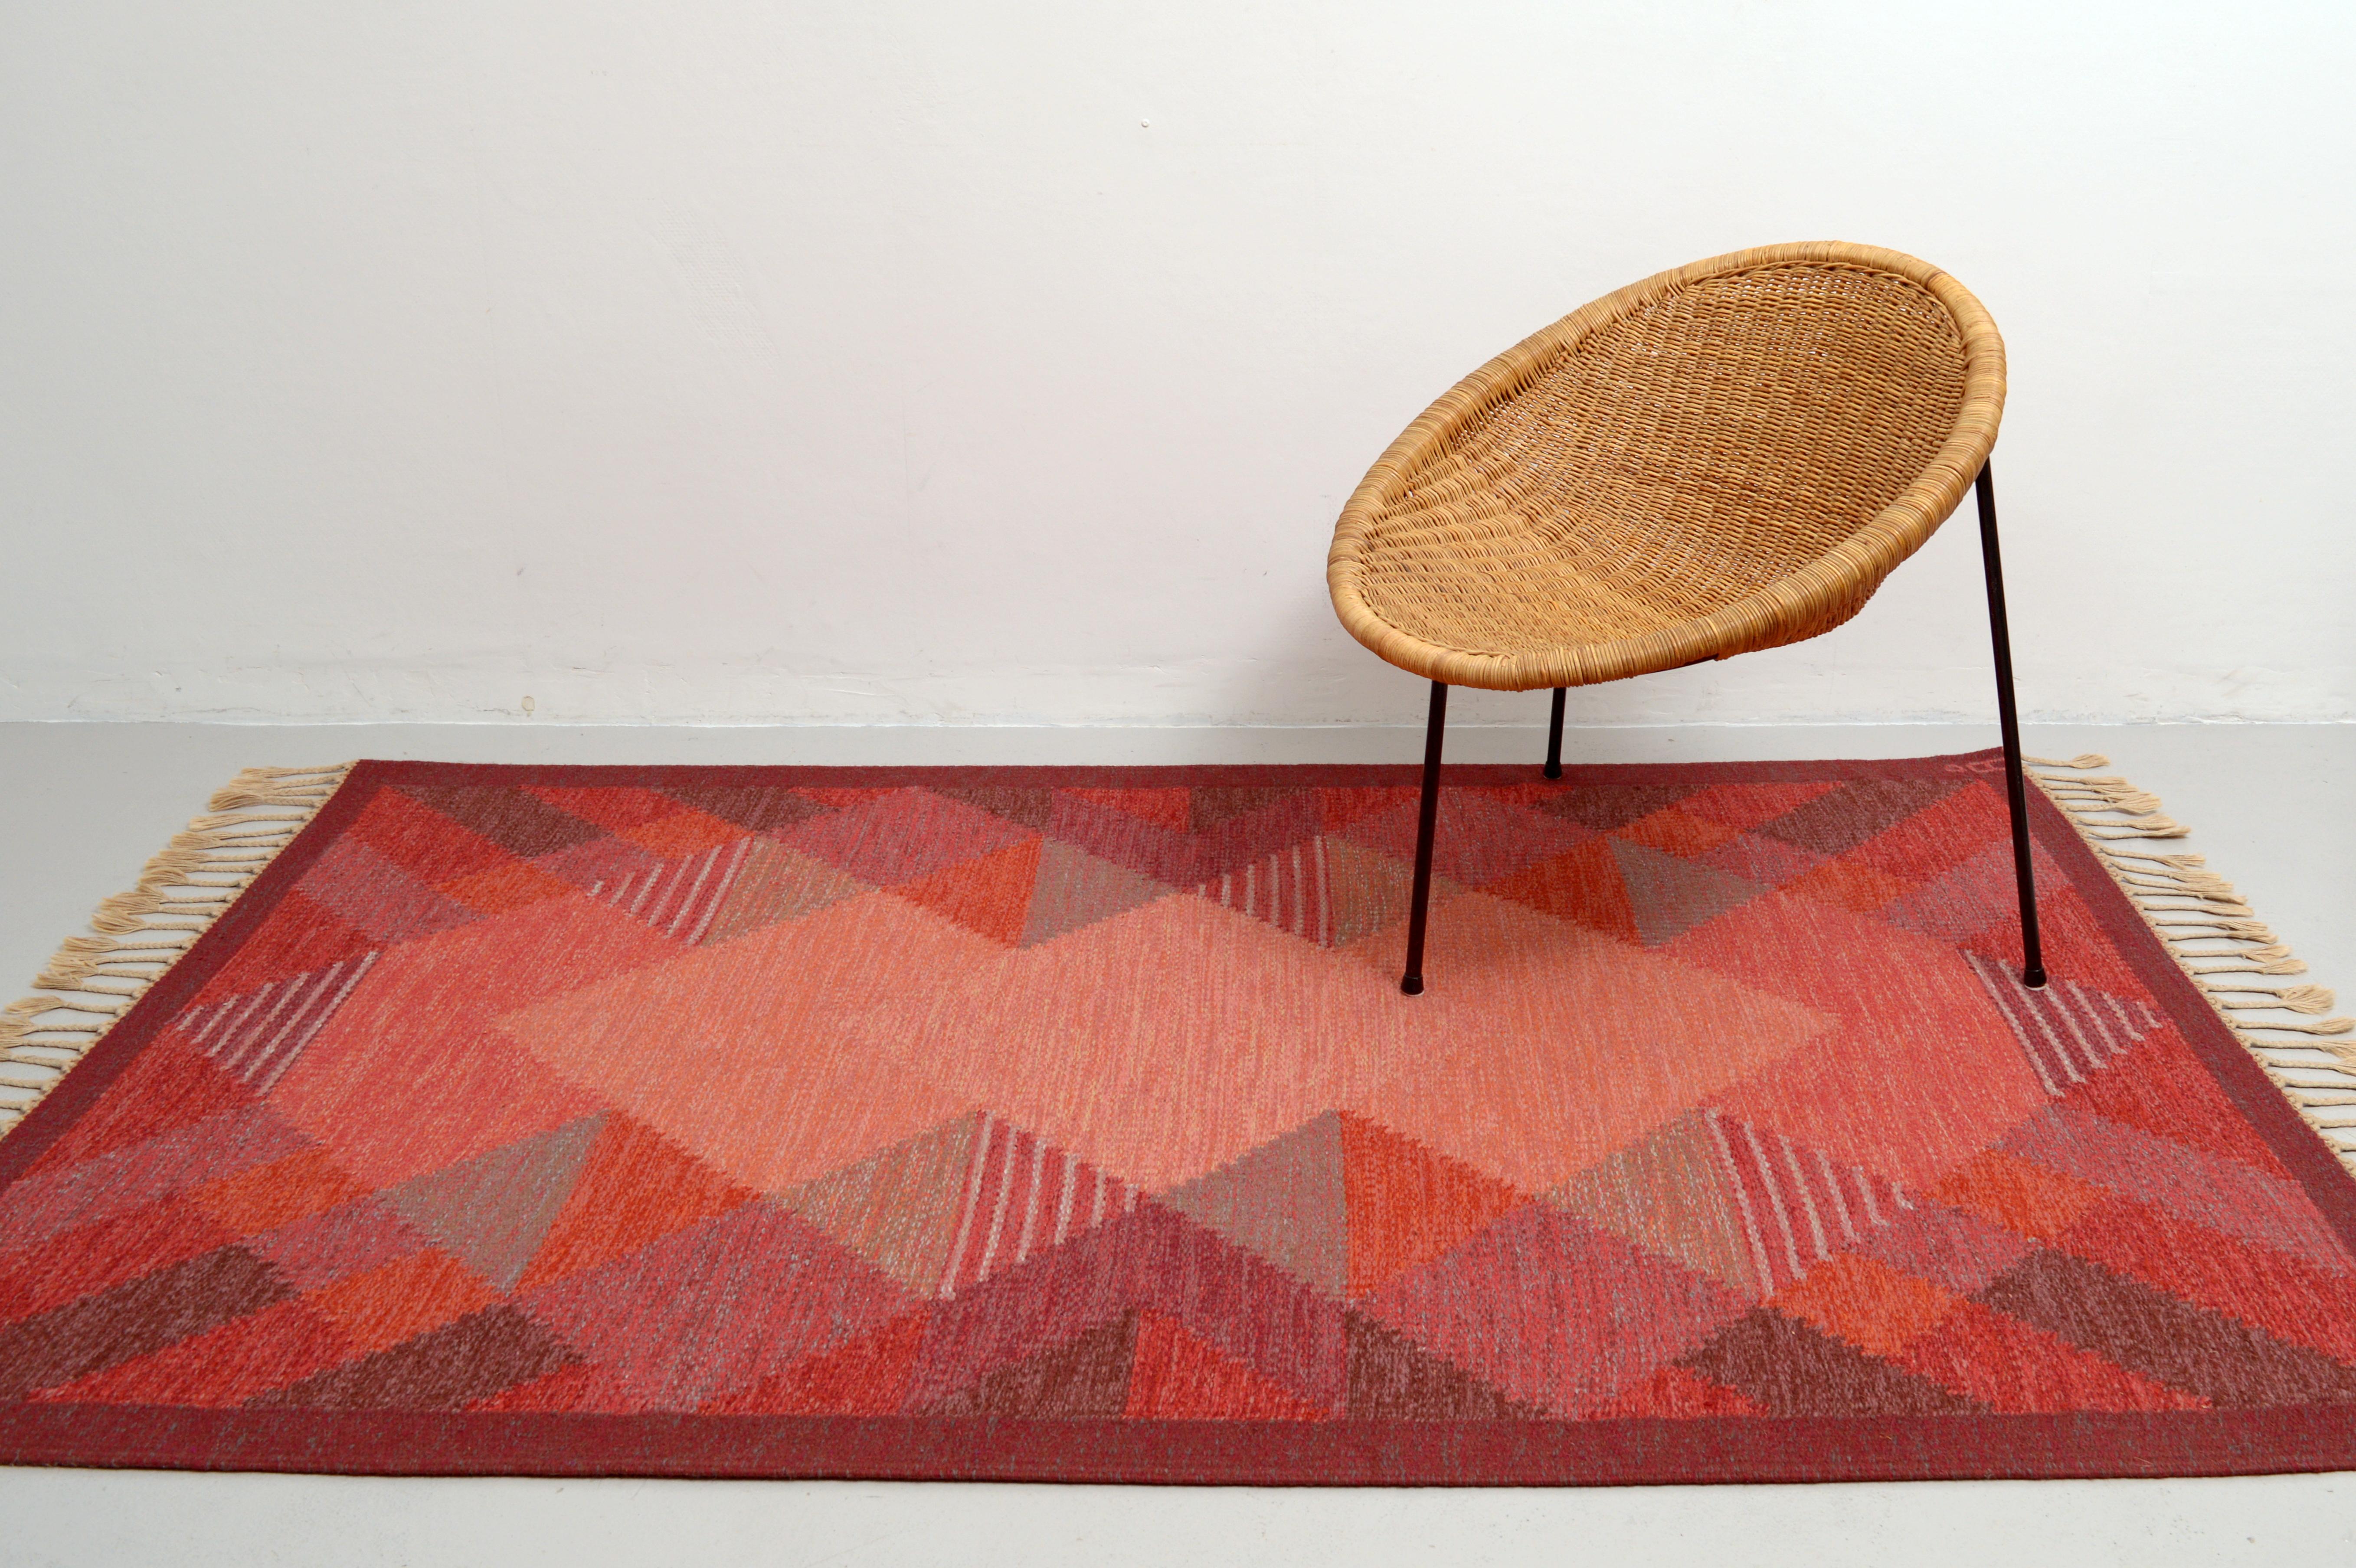 This rölakan carpet / kelim rug ”Aniara” was designed by Anna Johanna Ångström during the 1960s. This excellent example with fields in different shades of red, purple, pink and brown was woven in wool and signed ”Å” to the right hand corner.